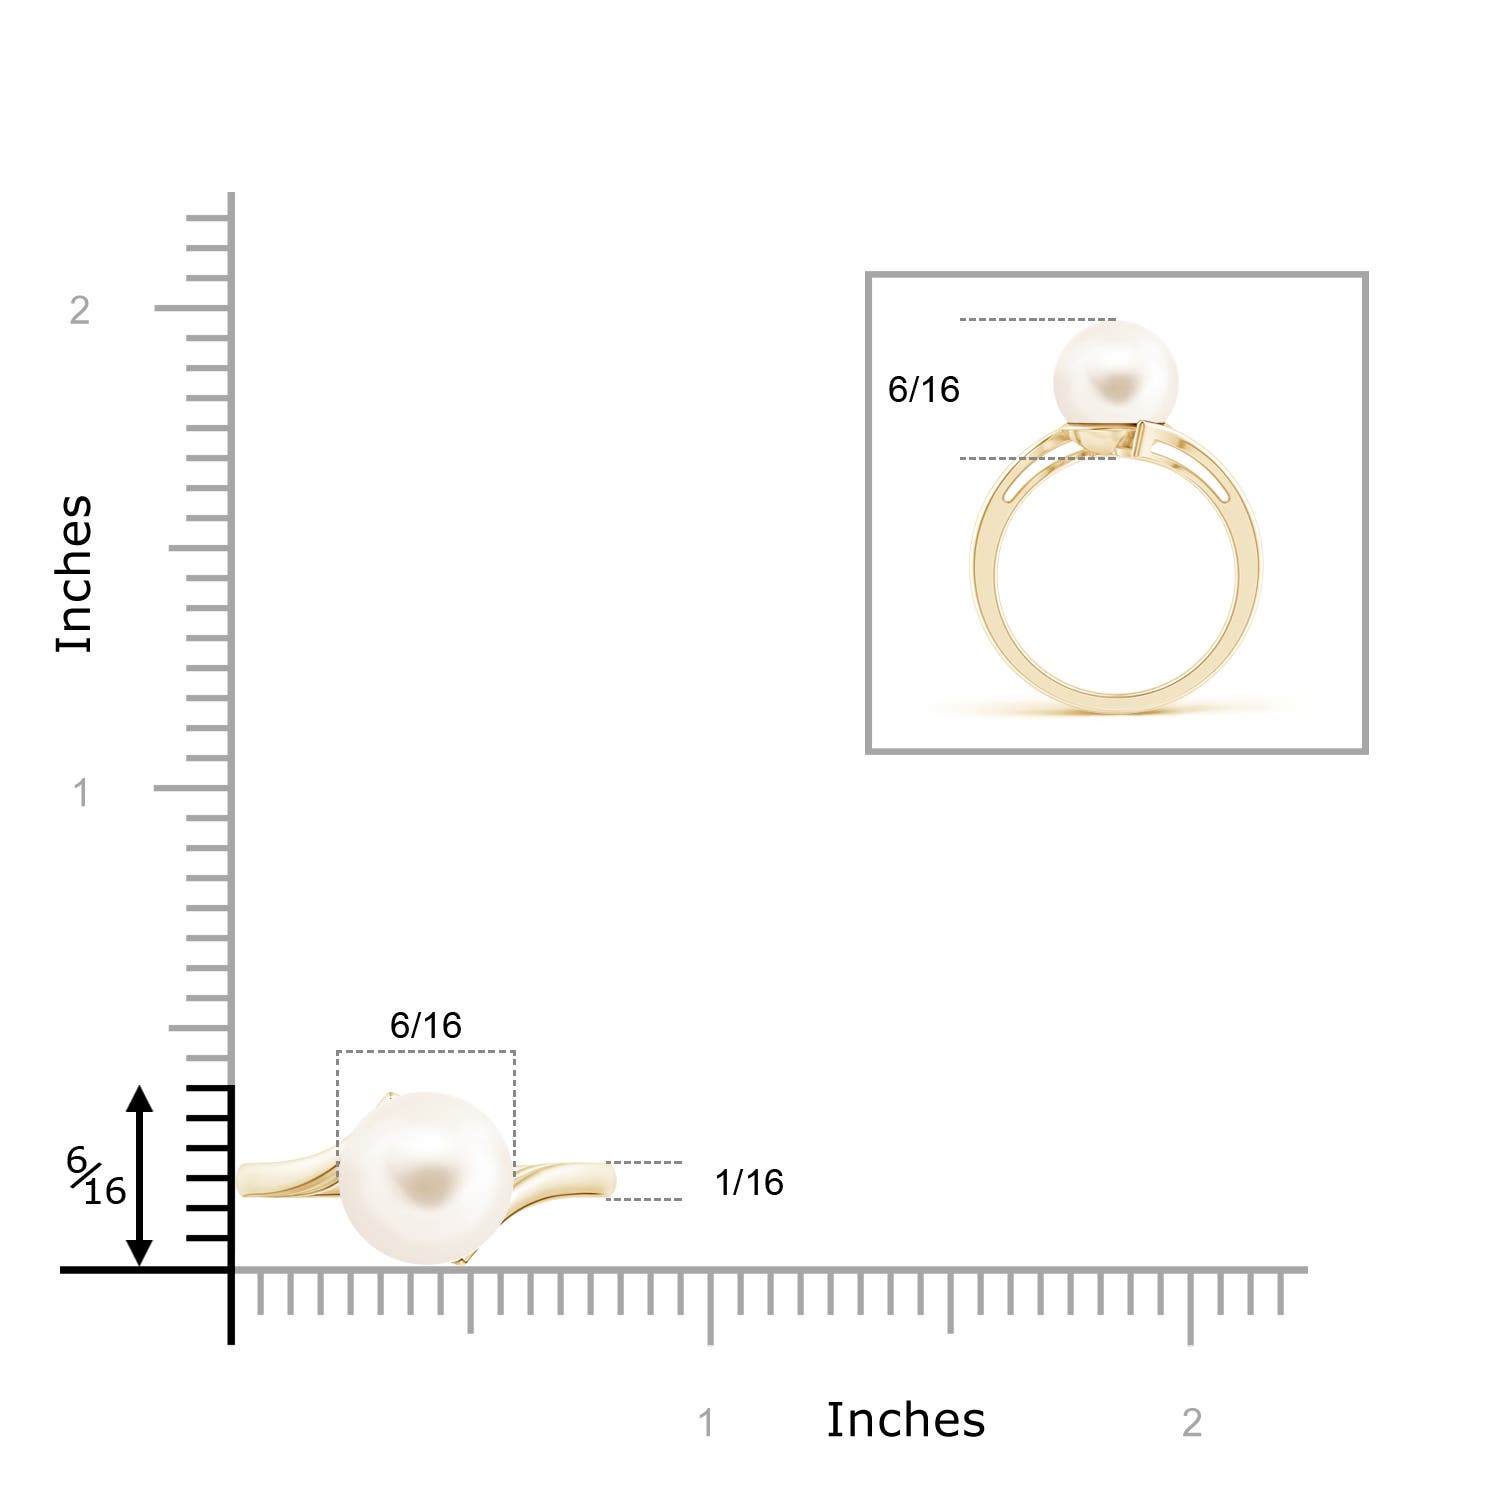 AAA / 5.25 CT / 14 KT Yellow Gold